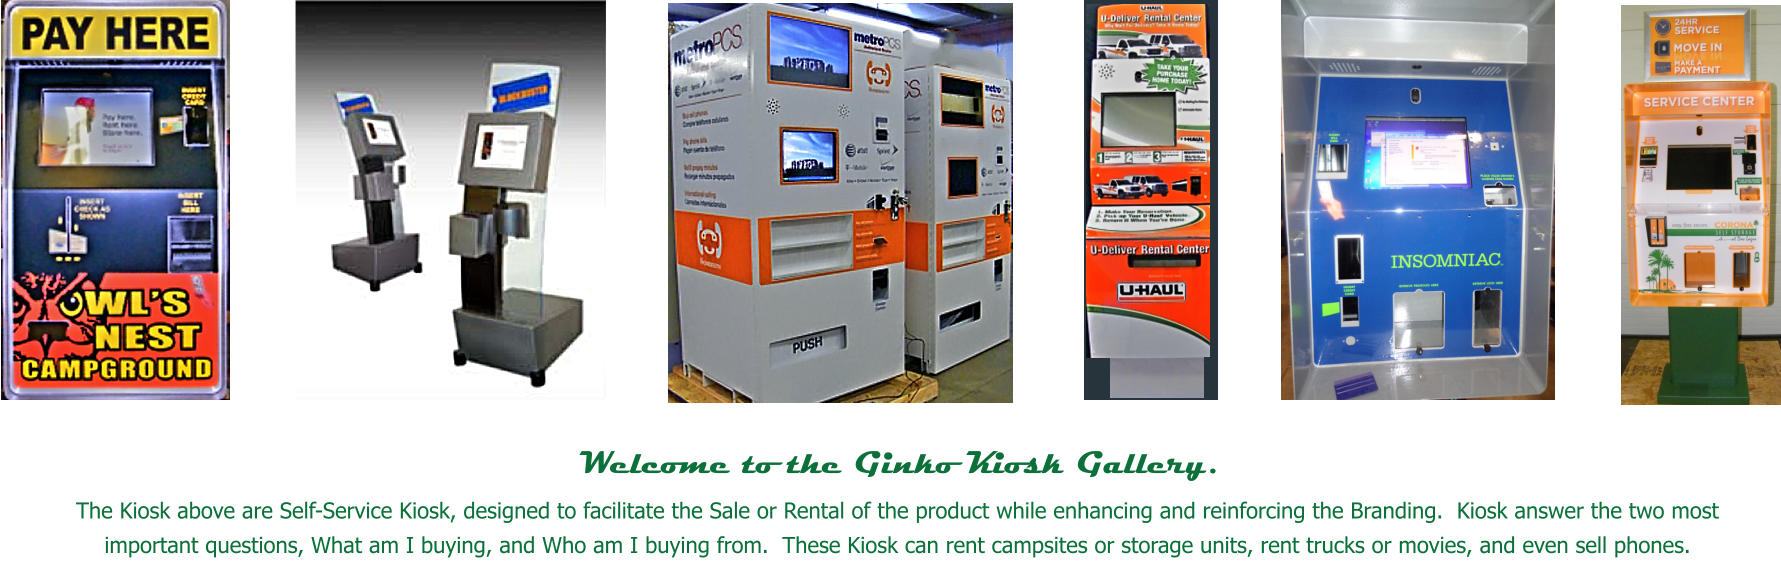 Welcome to the Ginko Kiosk Gallery.   The Kiosk above are Self-Service Kiosk, designed to facilitate the Sale or Rental of the product while enhancing and reinforcing the Branding.  Kiosk answer the two most important questions, What am I buying, and Who am I buying from.  These Kiosk can rent campsites or storage units, rent trucks or movies, and even sell phones.